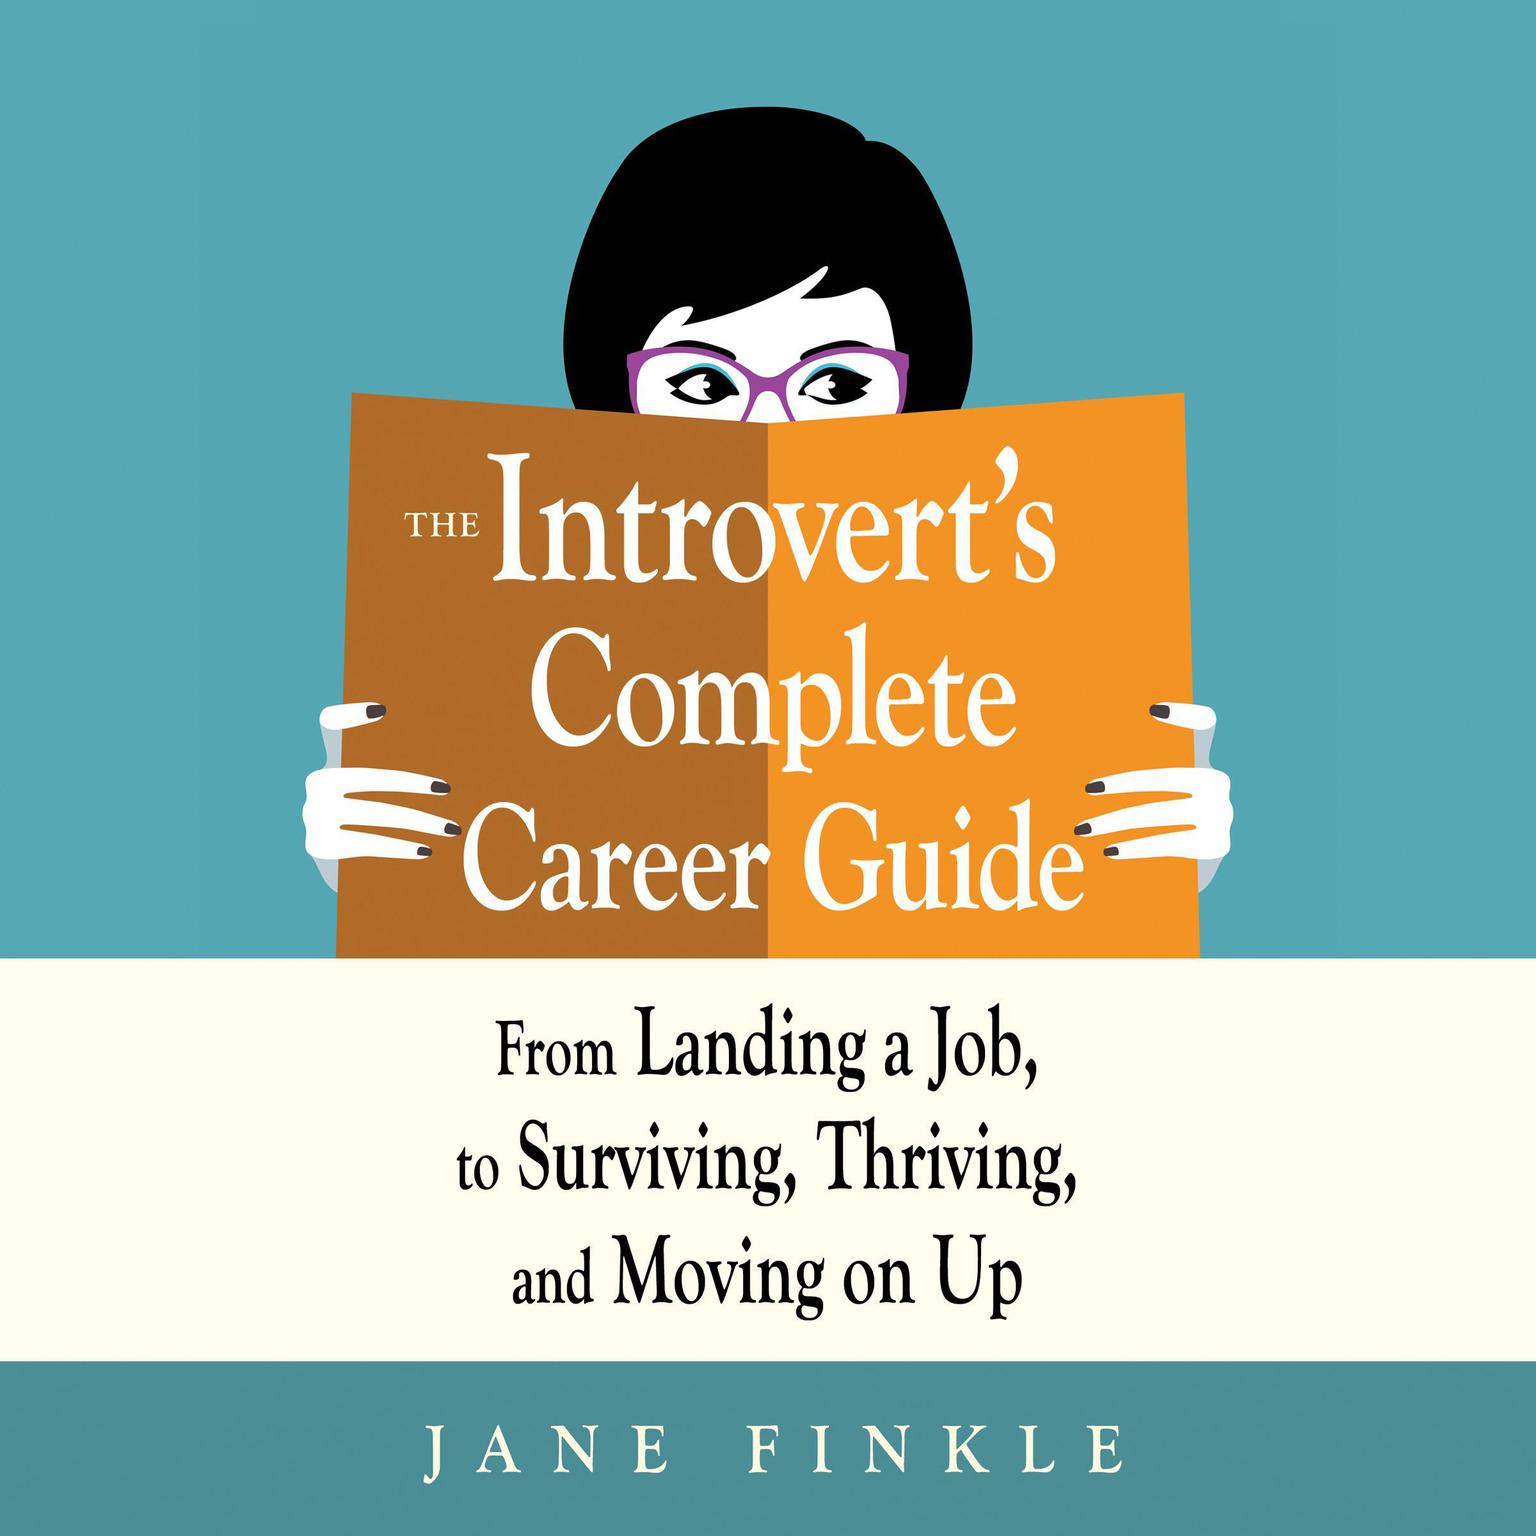 The Introverts Complete Career Guide: From Landing a Job, to Surviving, Thriving, and Moving on Up Audiobook, by Jane Finkle